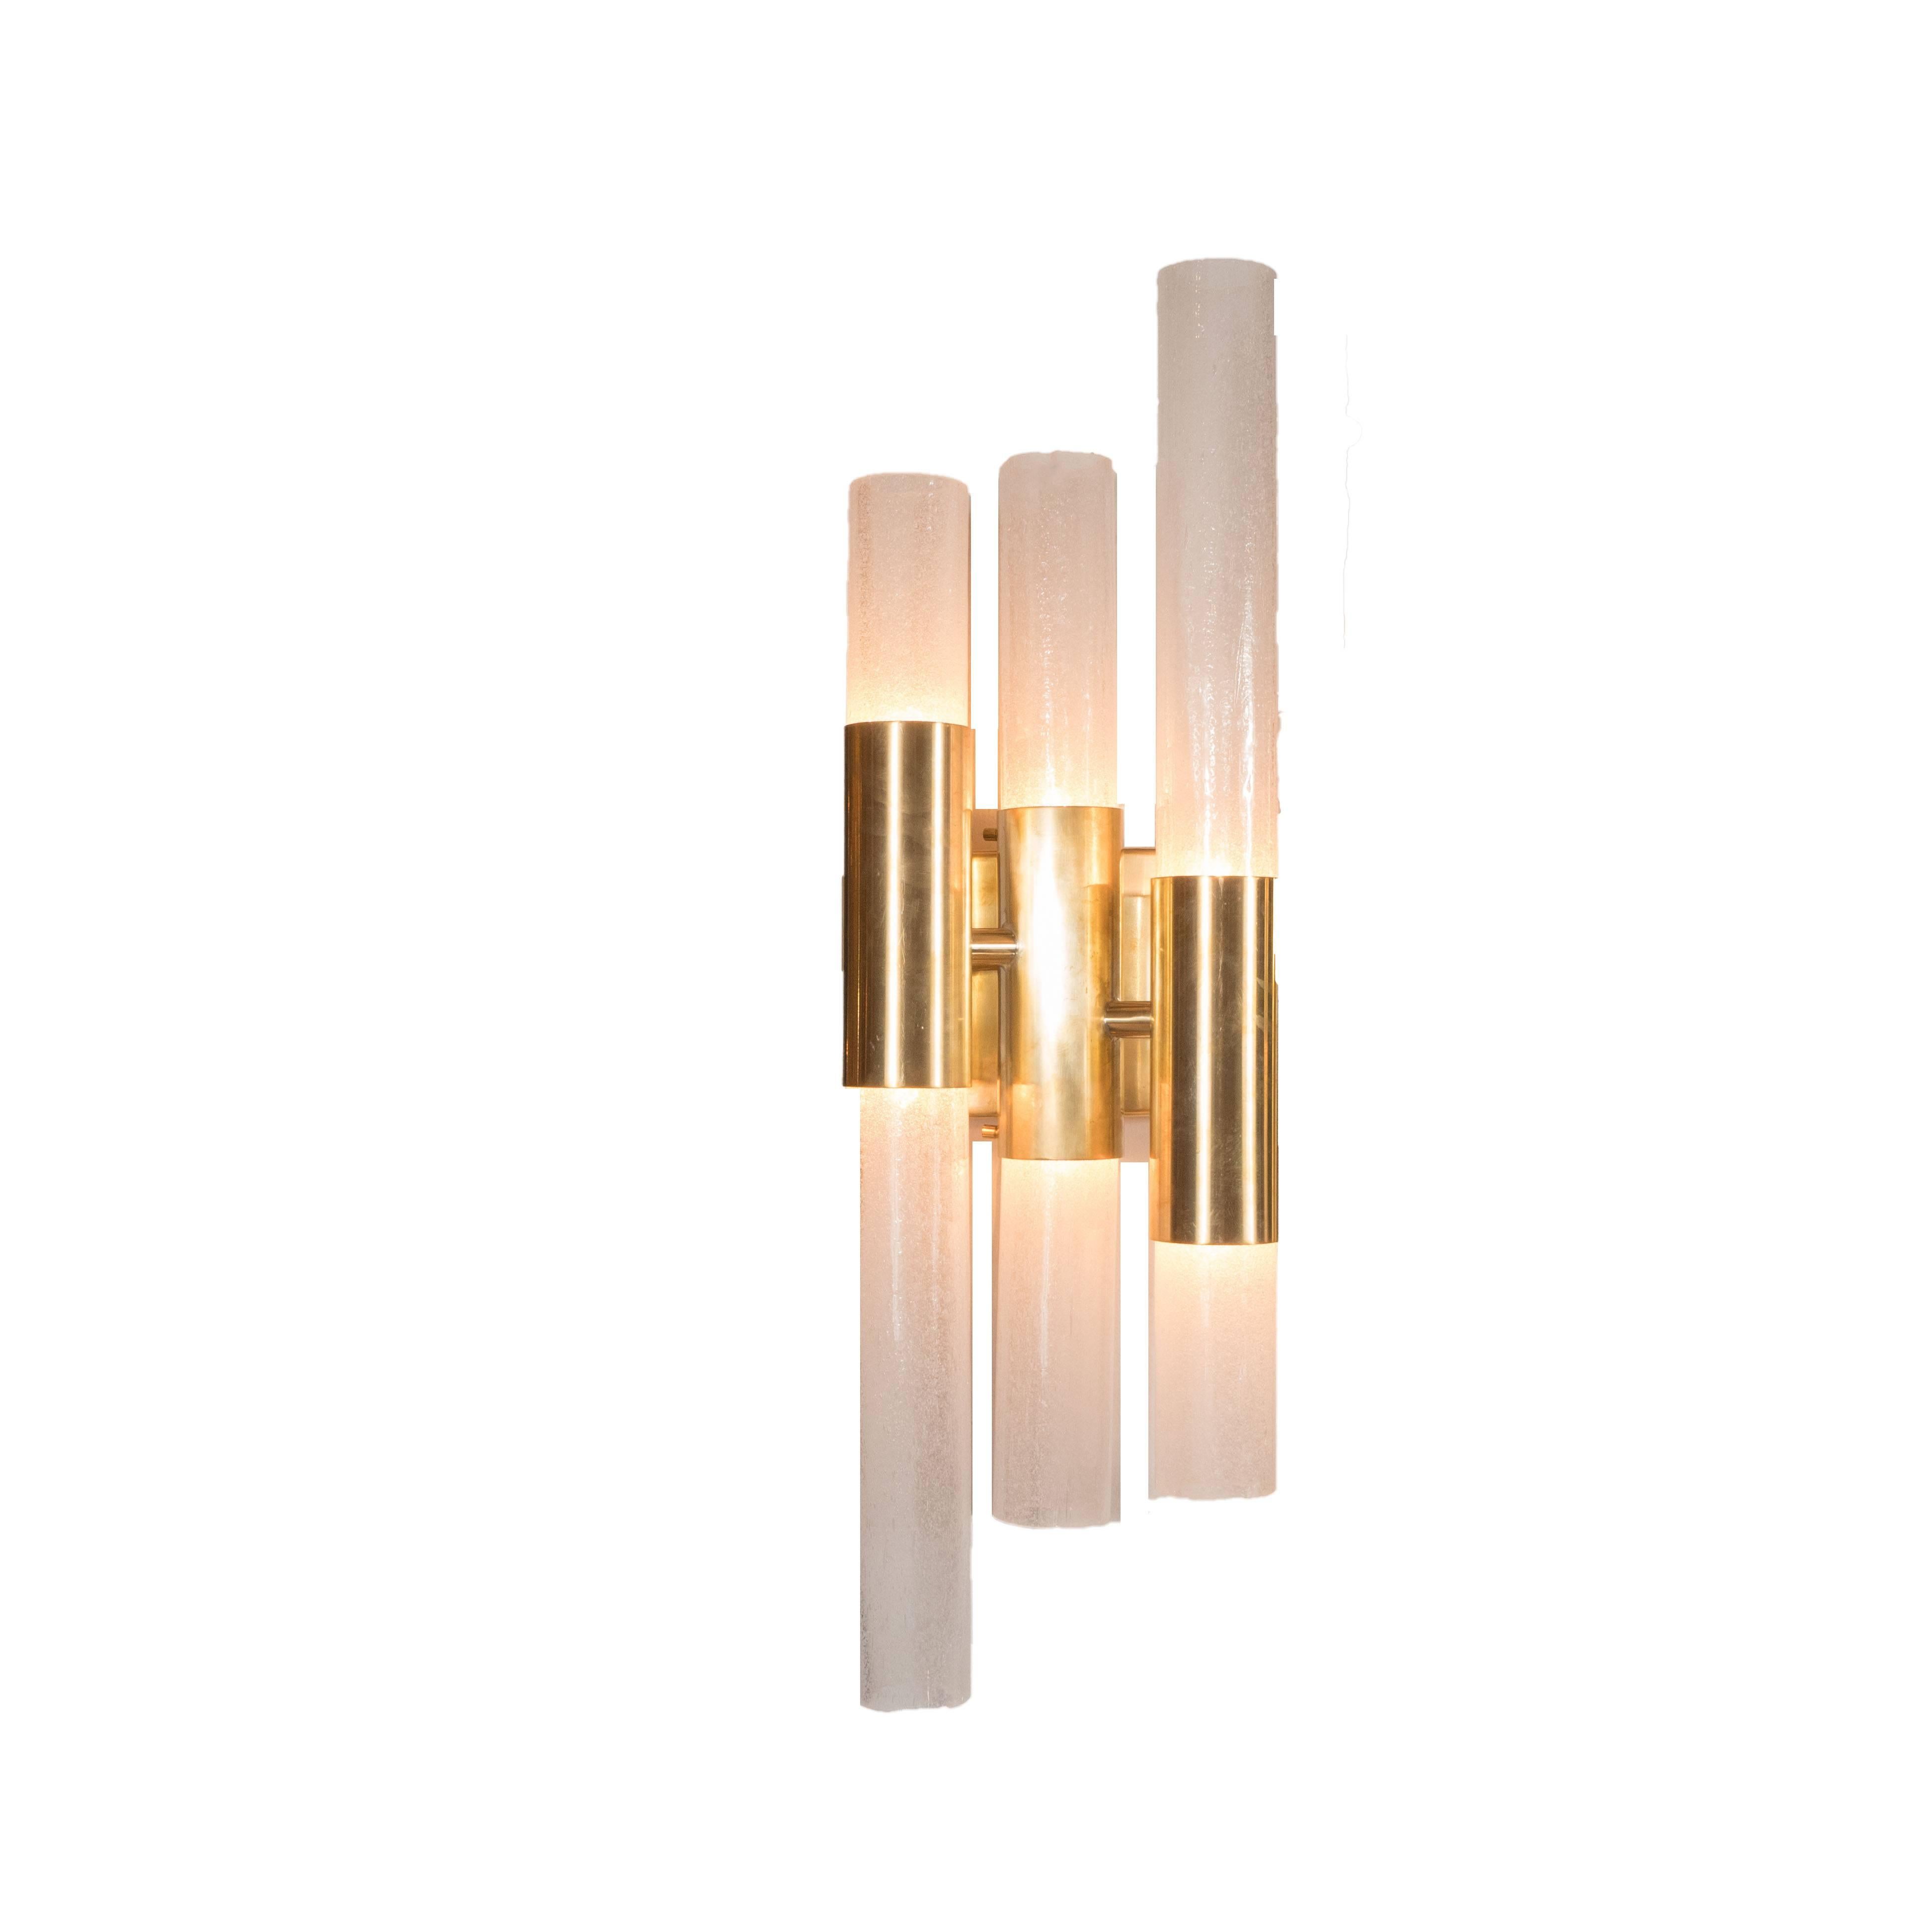 This stunning pair of modernist Pulegoso sconces were handblown in Murano, Italy- the islands off the coast of Venice renowned for centuries for their superlative glass production. They feature a staggered form created by tubular shades of differing